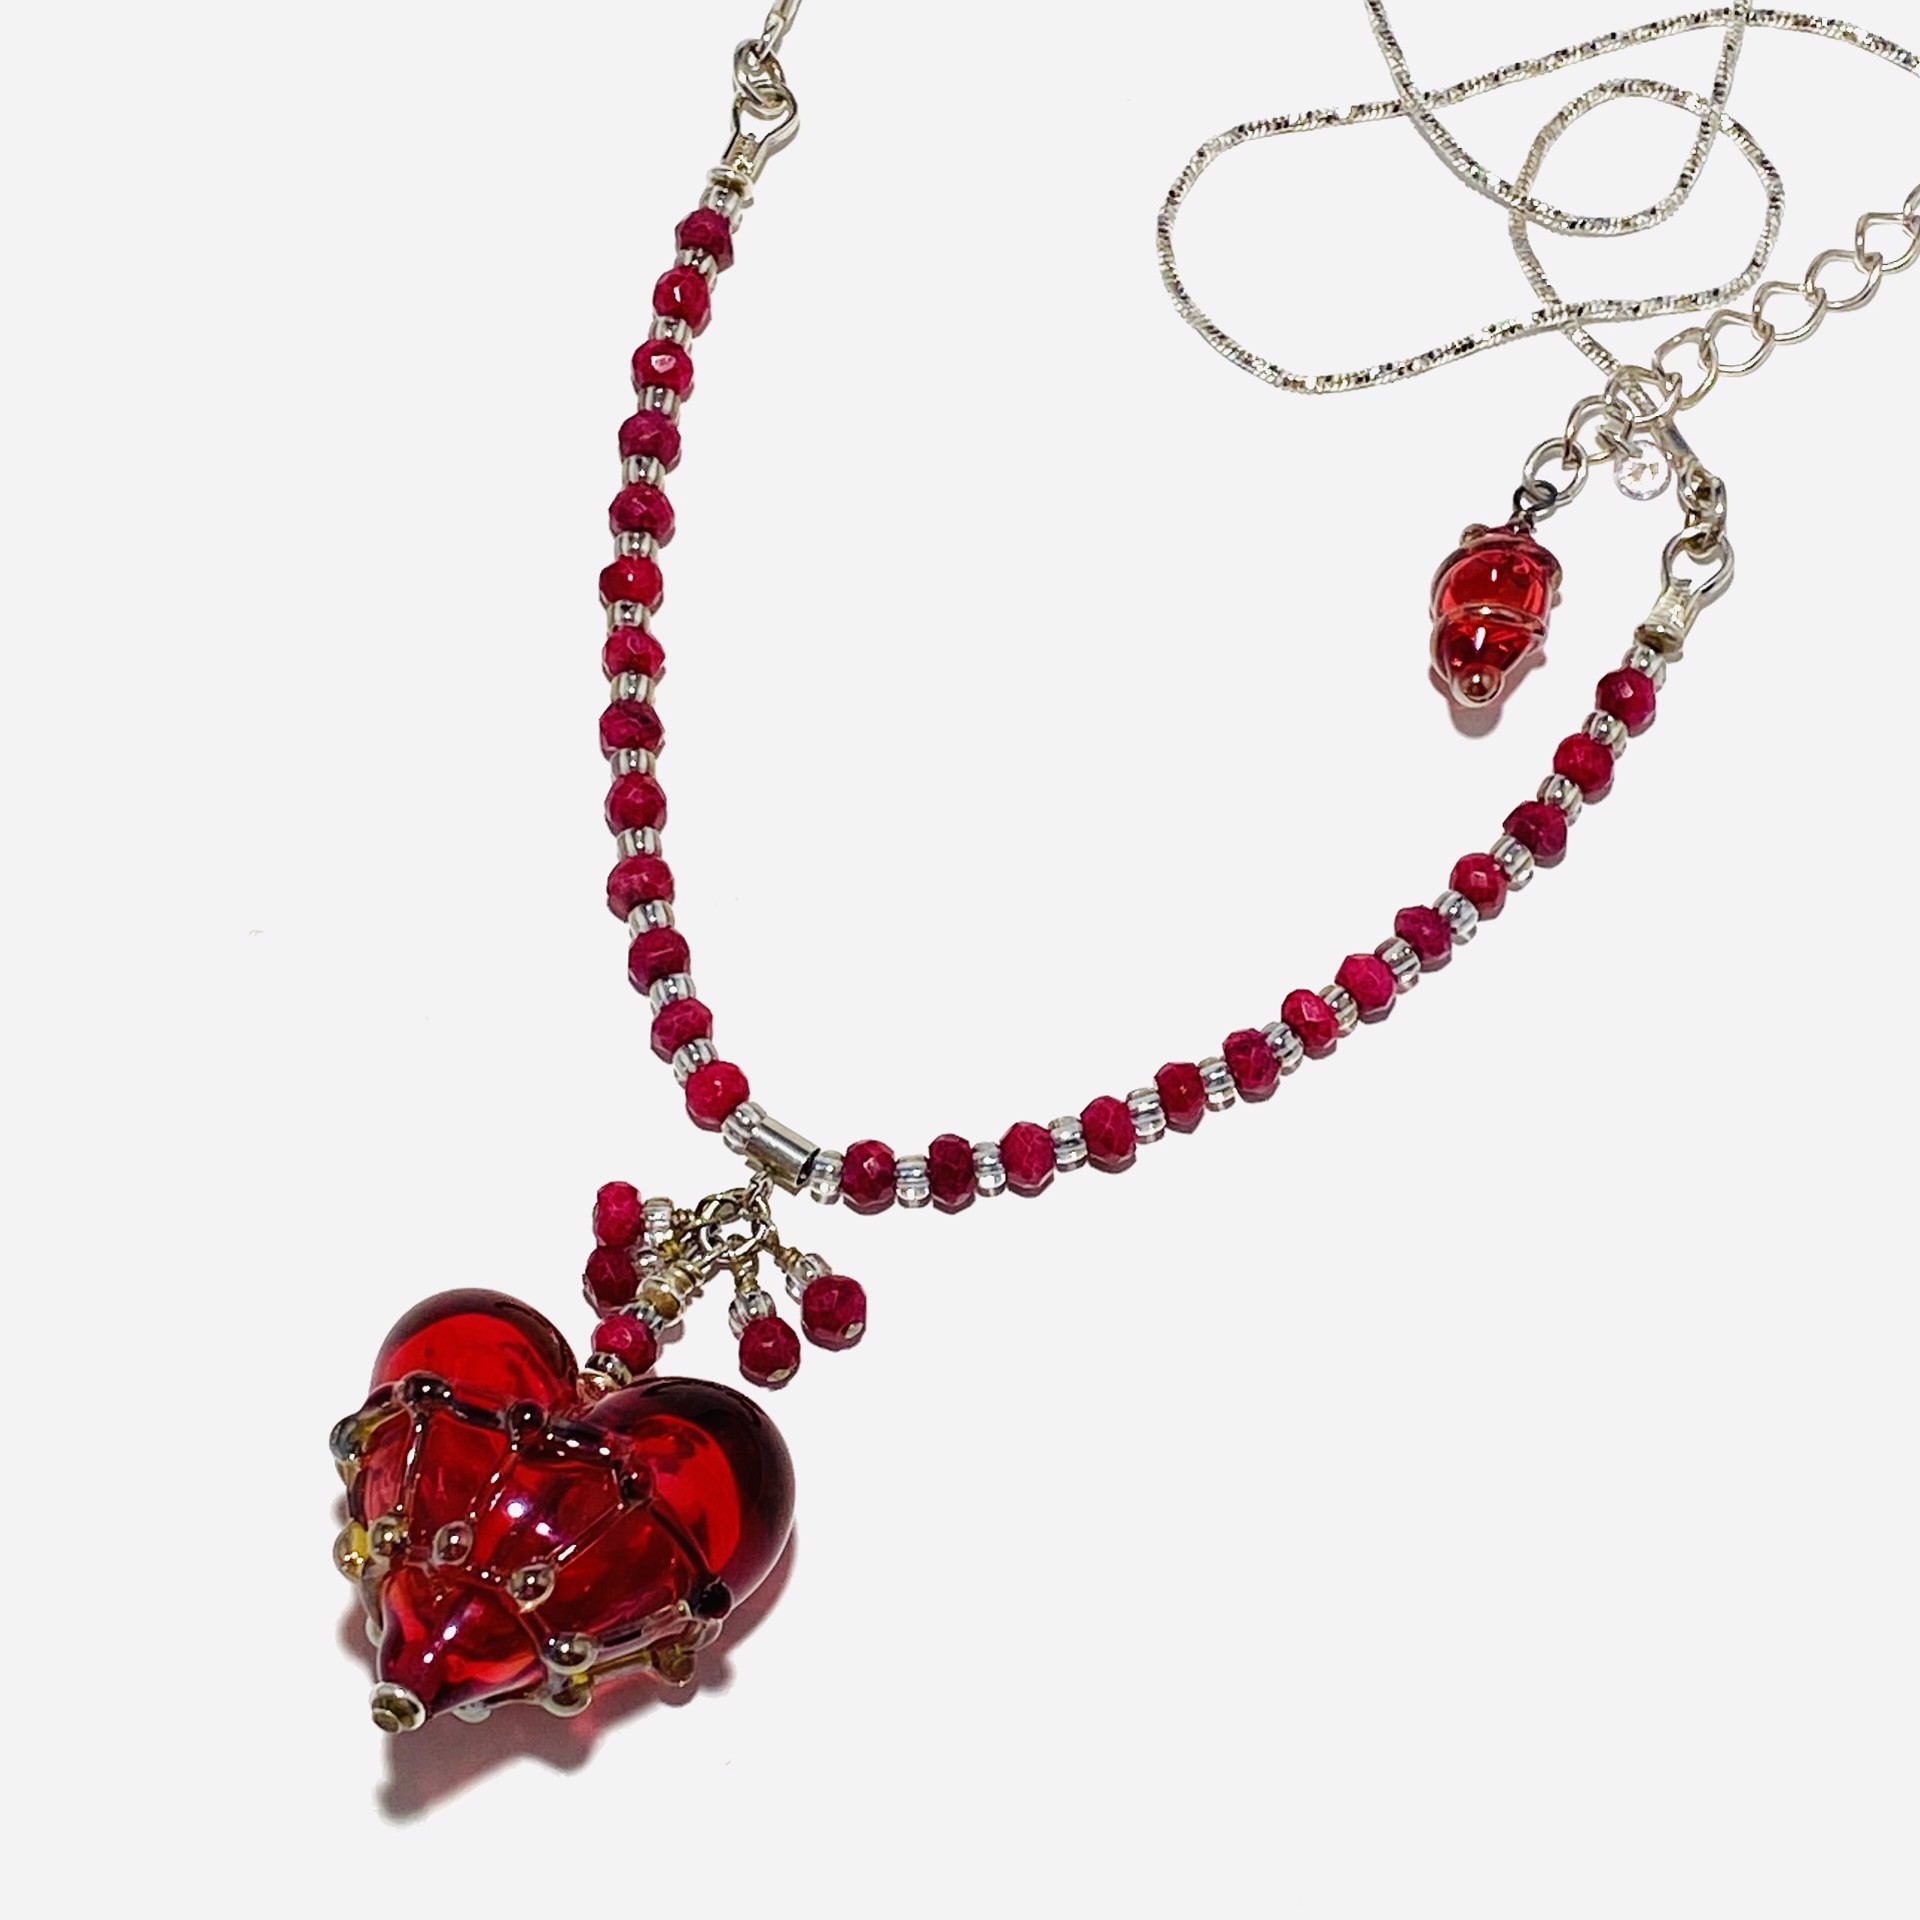 LS23-5A Ruby Gold Notos Cage Heart Faceted Ruby Bead and Sterling Chain Necklace by Linda Sacra